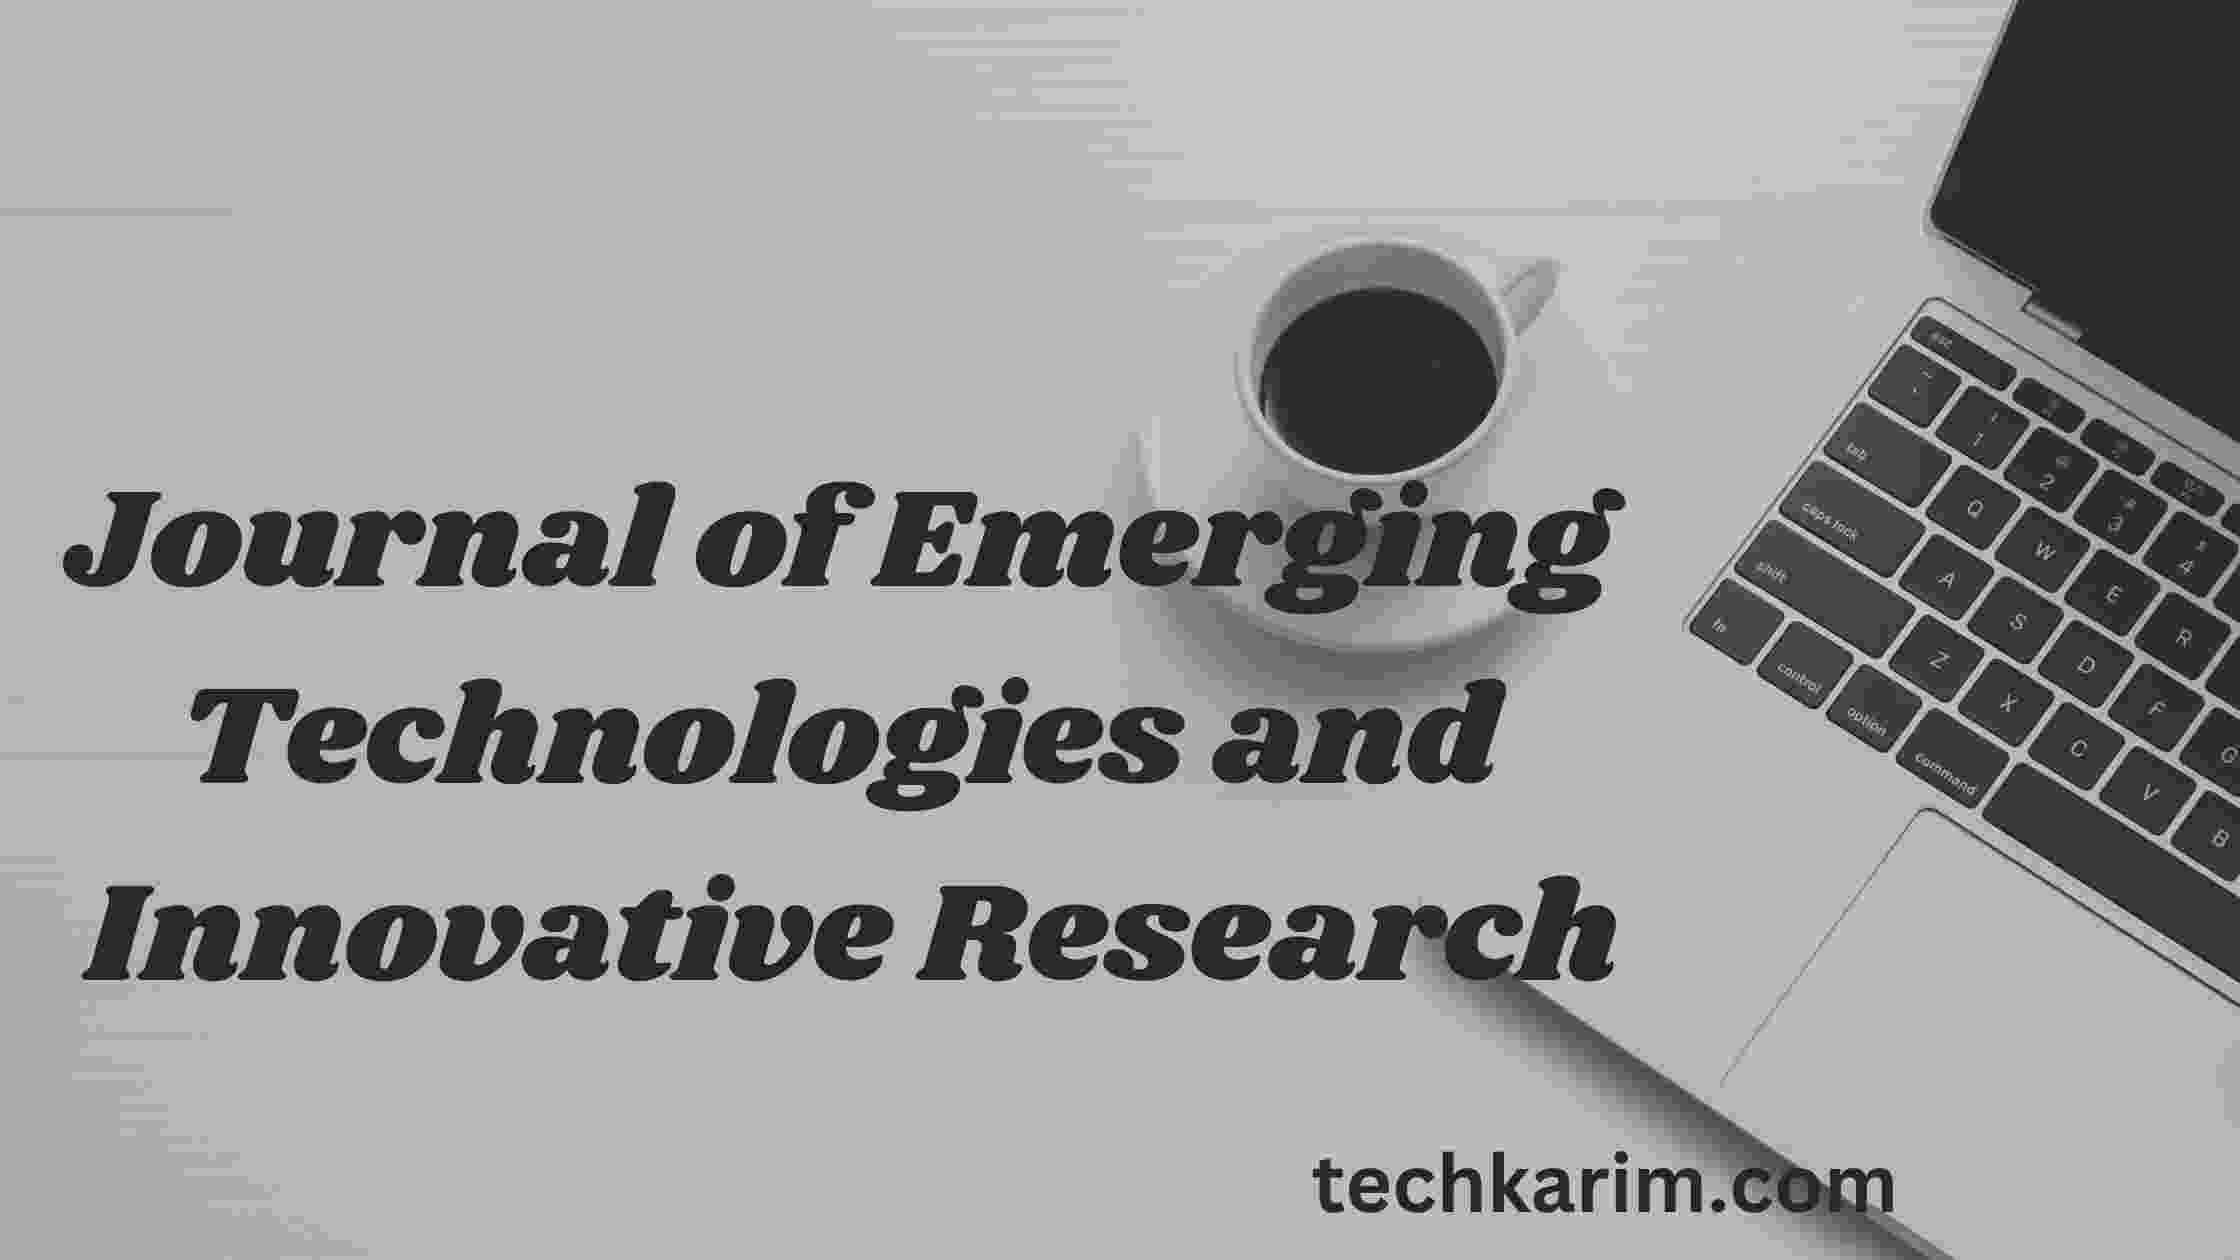 Journal of Emerging Technologies and Innovative Research